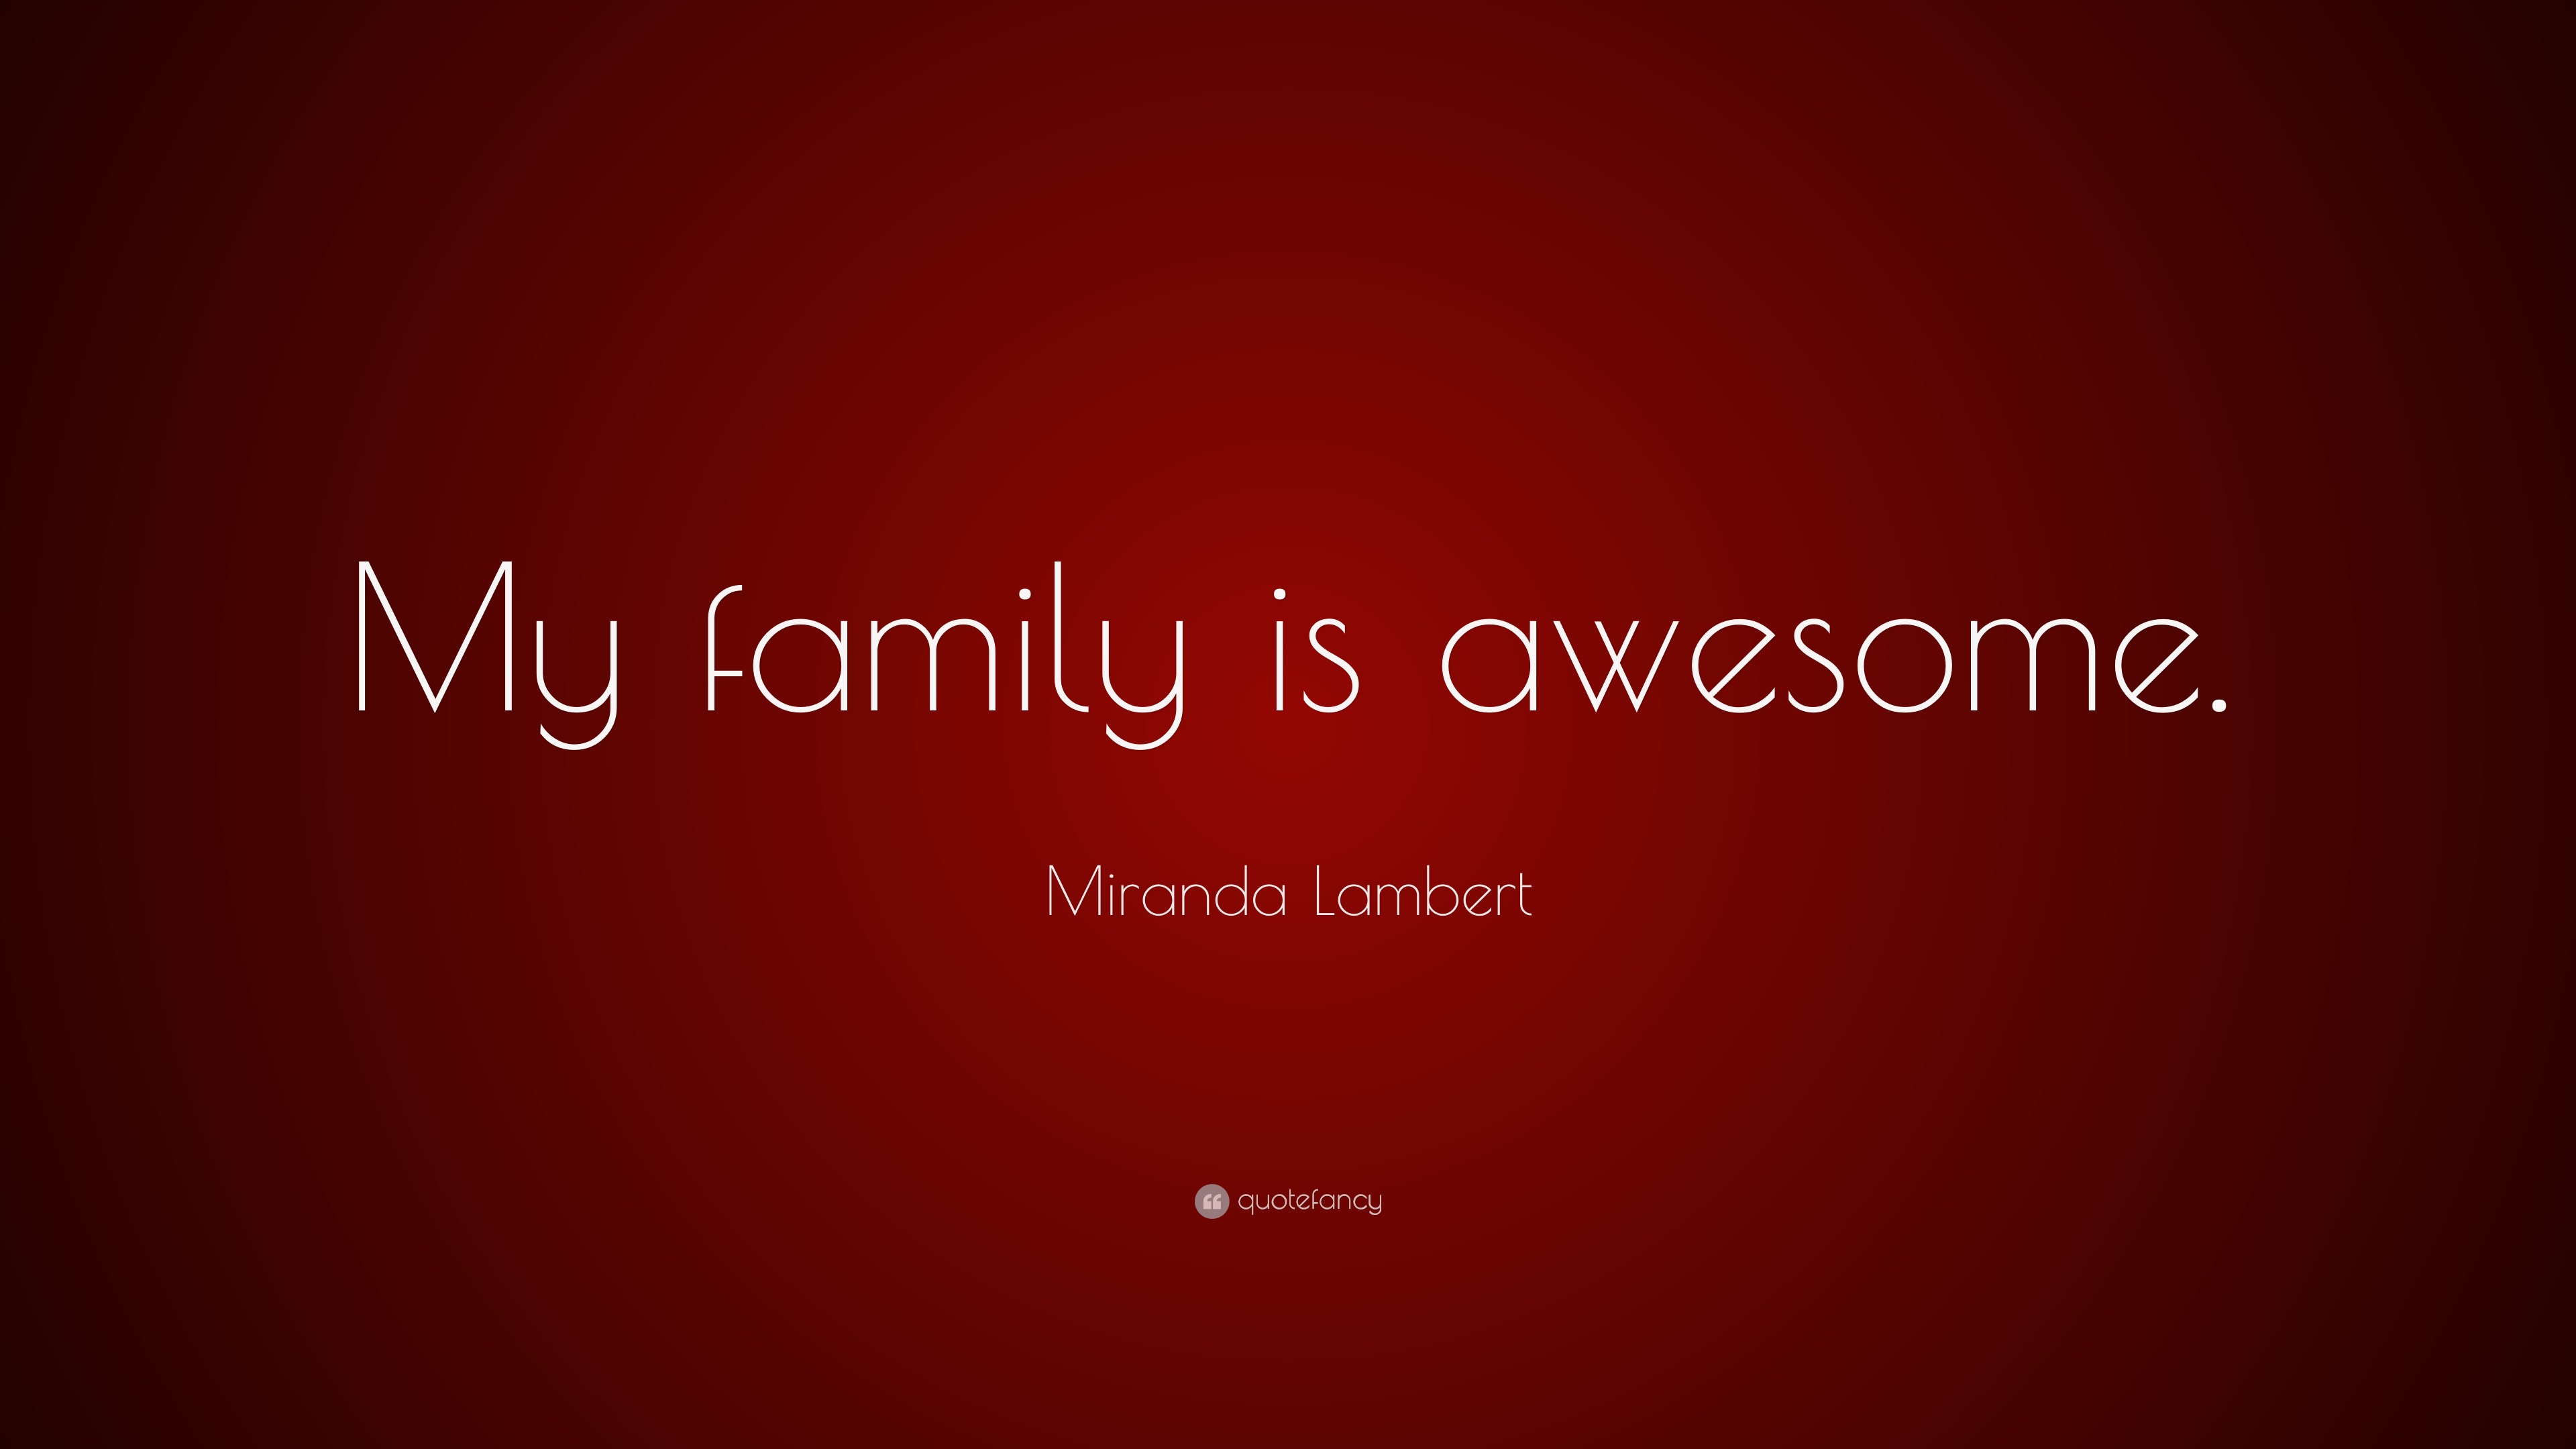 Awesome My Family Quotes Is